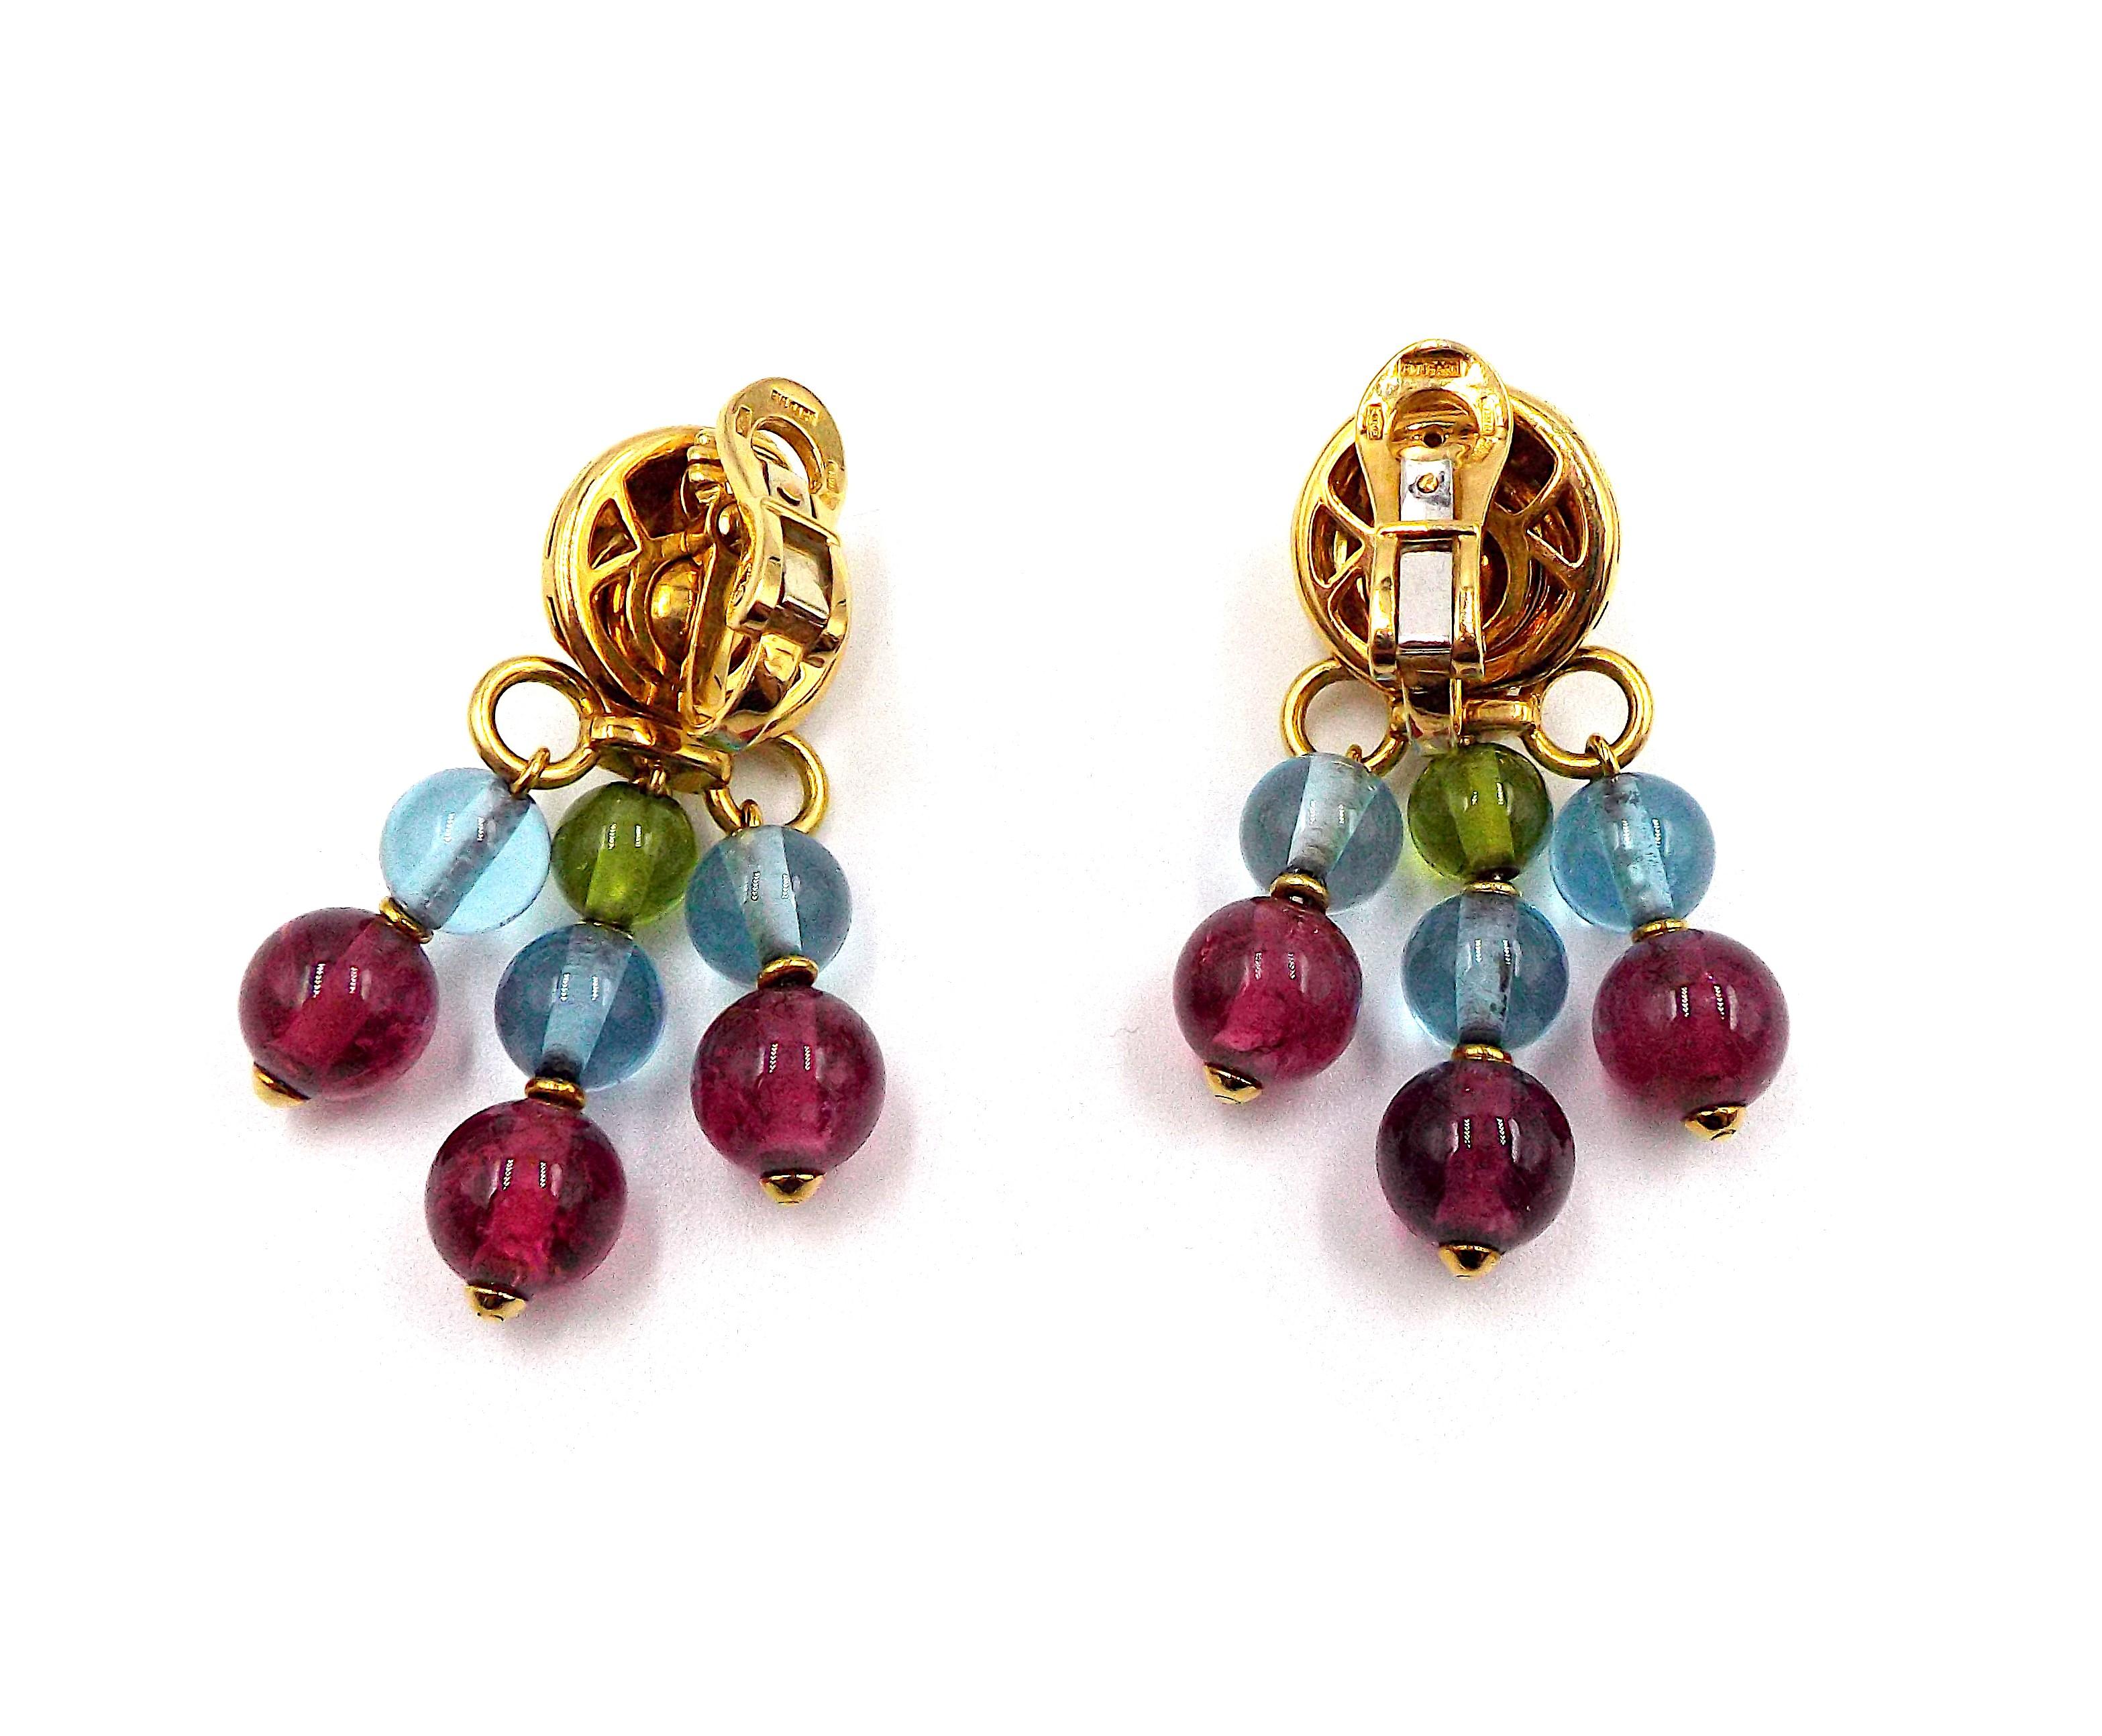 A pair of fancy colorful multi gemstone earrings made of 18K yellow gold. Each earring weighs 17.4 grams, length is approximately 1 5/8 inches, width is approximately 1 inch. Circa 1970s. Signed Bvlgari, stamped 750, Made in Italy, with Italian